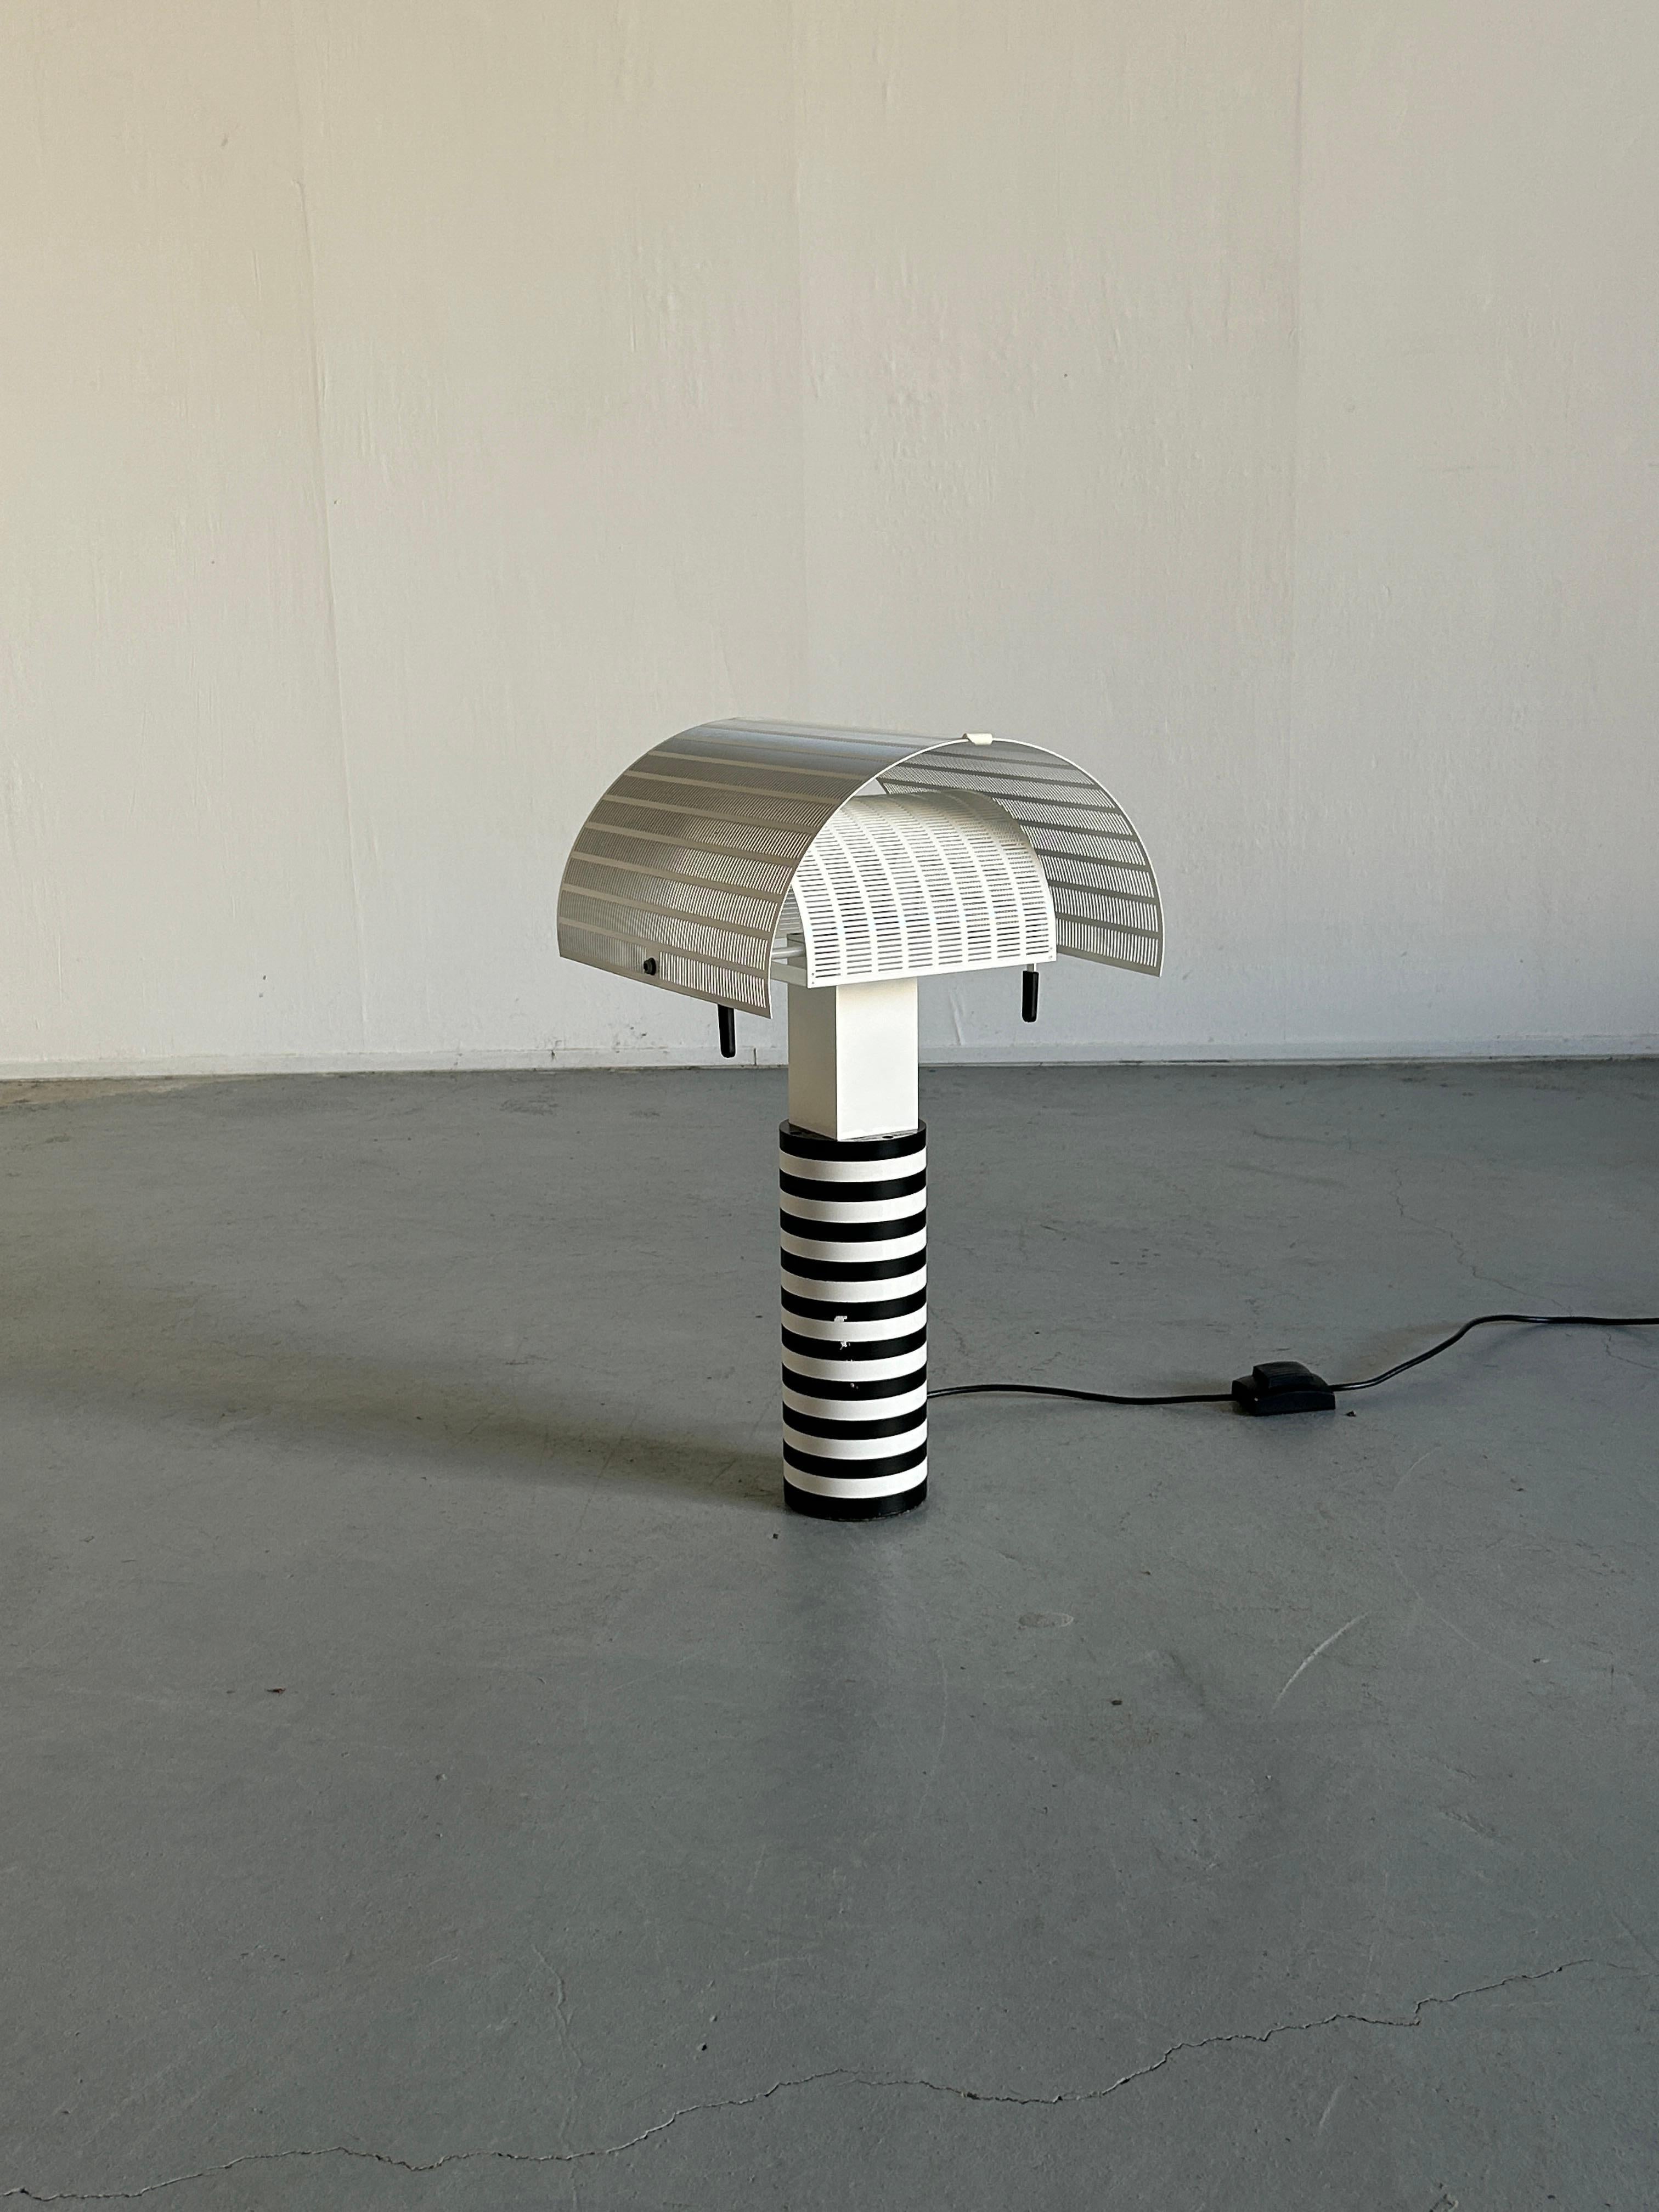 Mario Botta for Artemide, 'Shogun' table lamp, metal, Italy, 1986.
Late 1990s or early 2000s production,

Mario Botta referred to lamps as “people”. He said “Shogun is a person. He has a head, body and feet, plus he has a navel.” 
The designer is